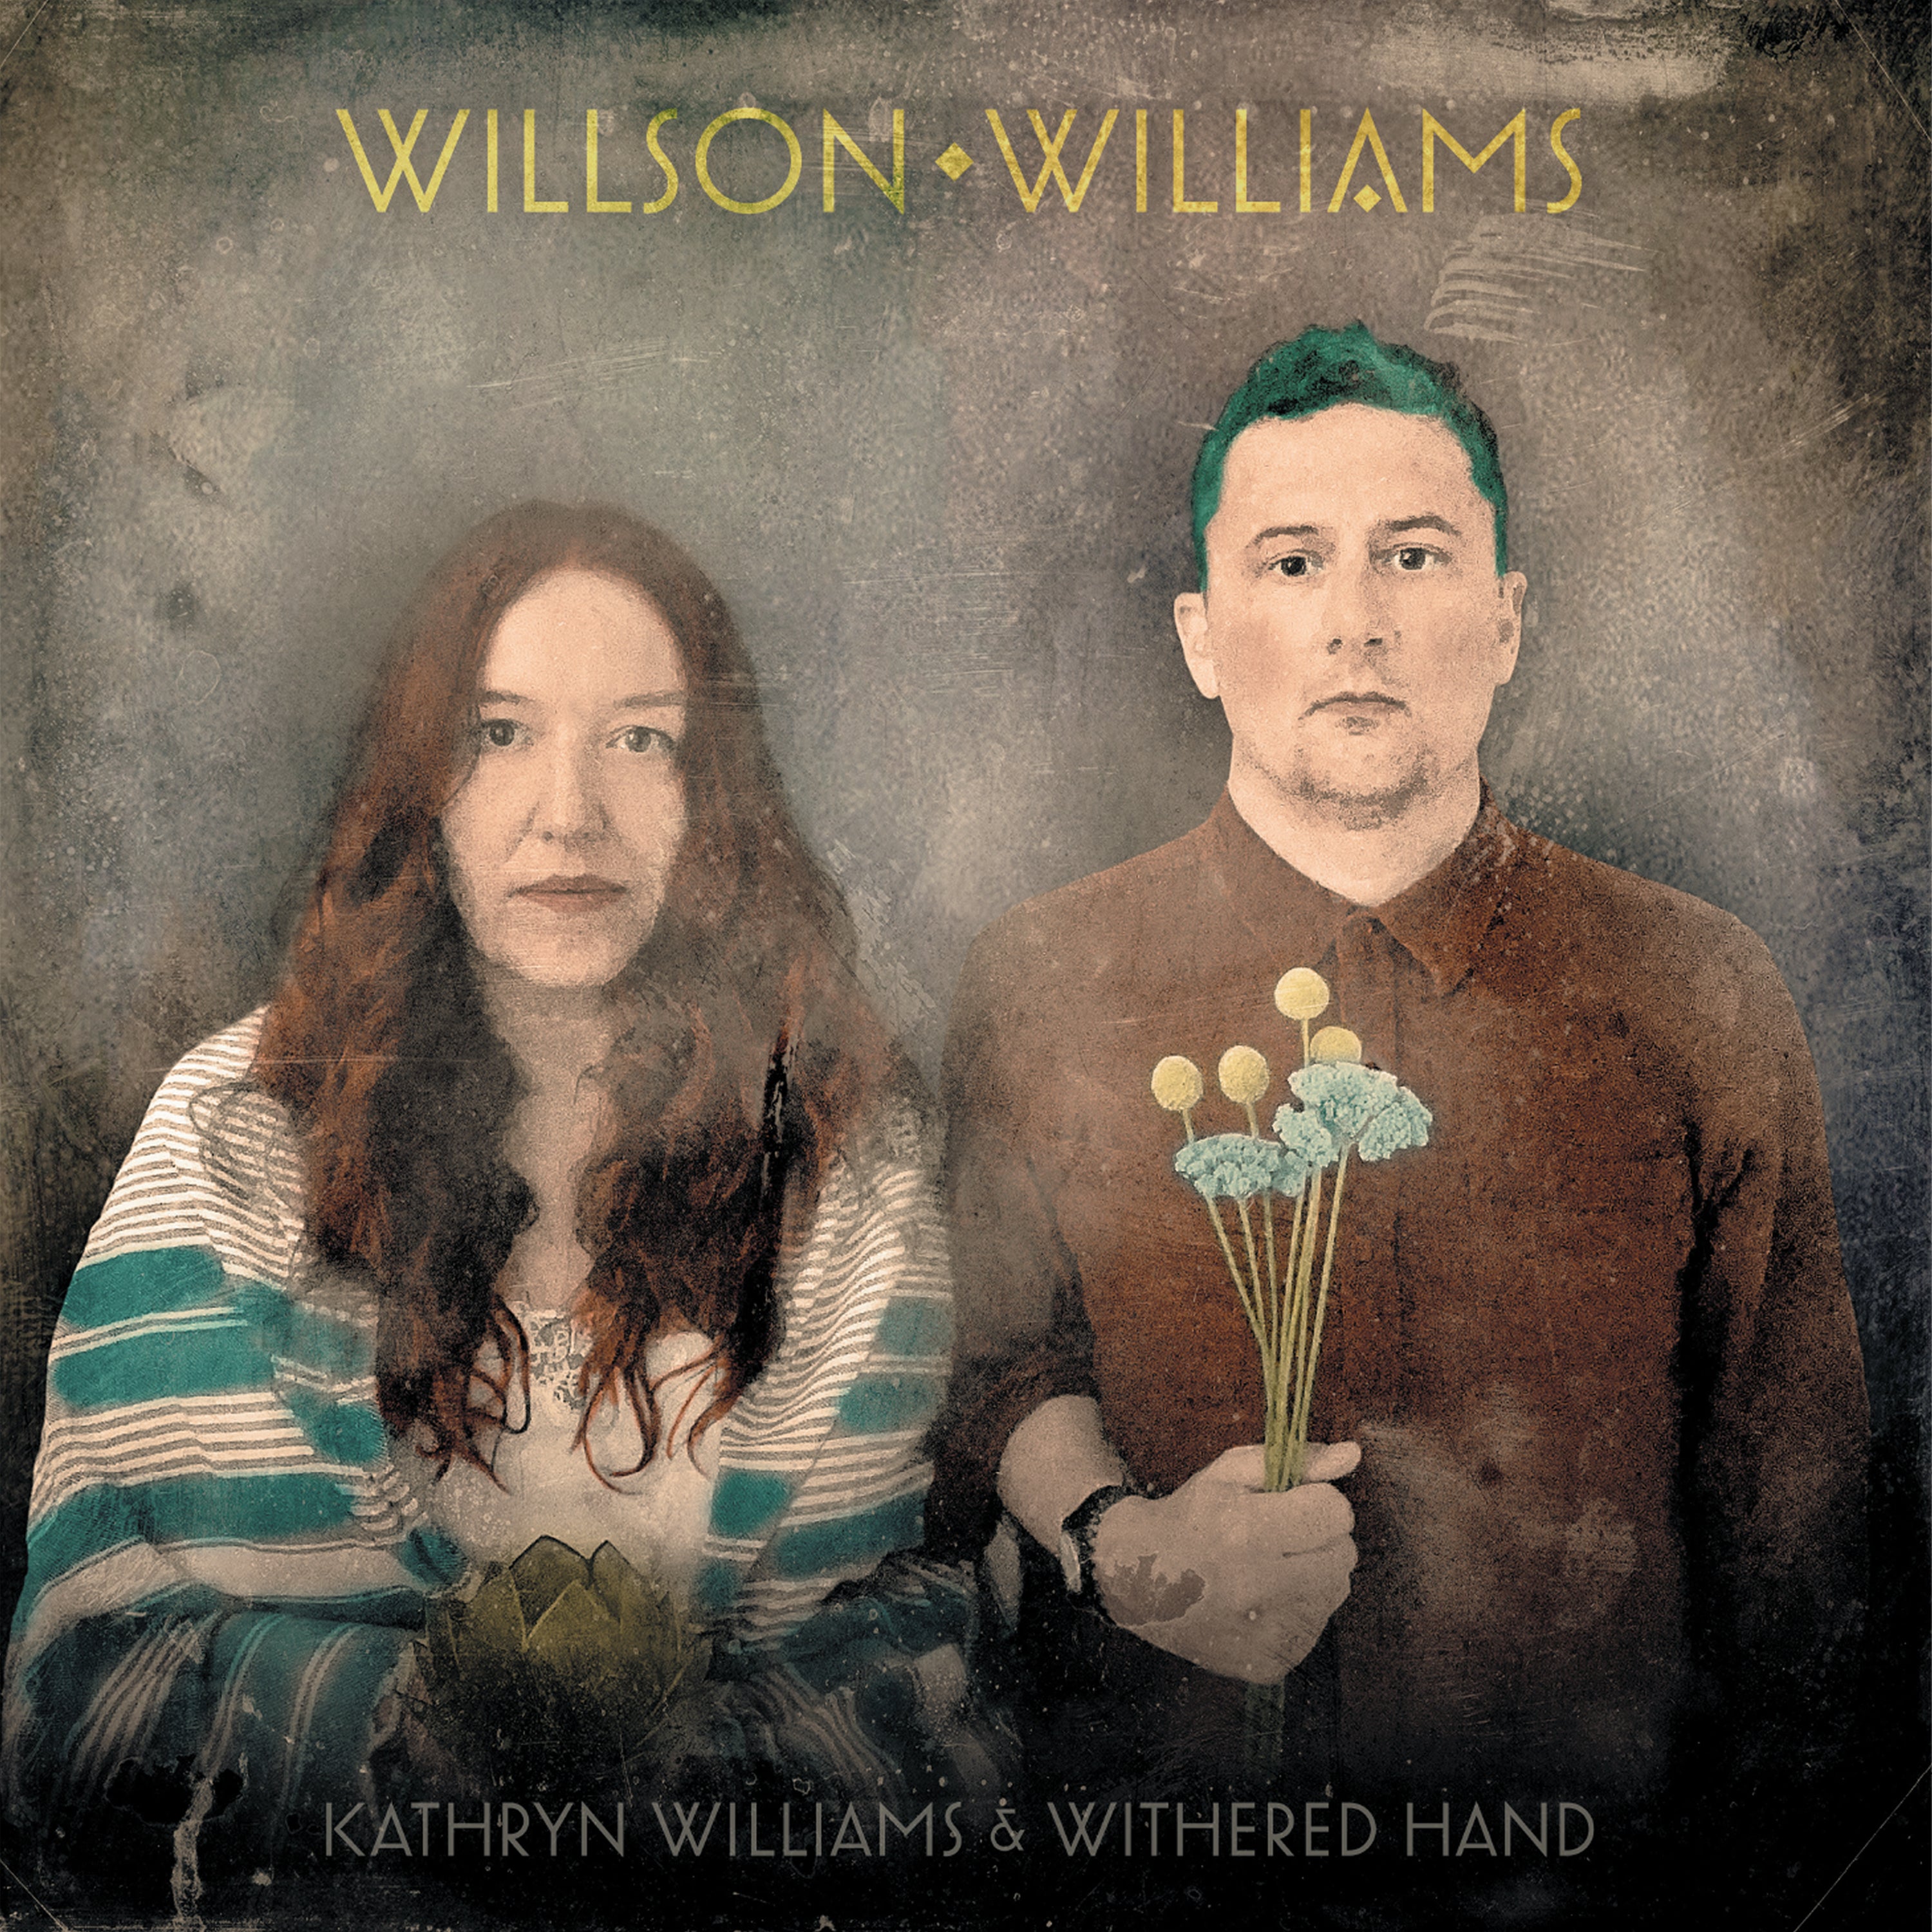 Kathryn Williams & Withered Hand - Wilson Williams: Limited Clear Yellow Vinyl LP